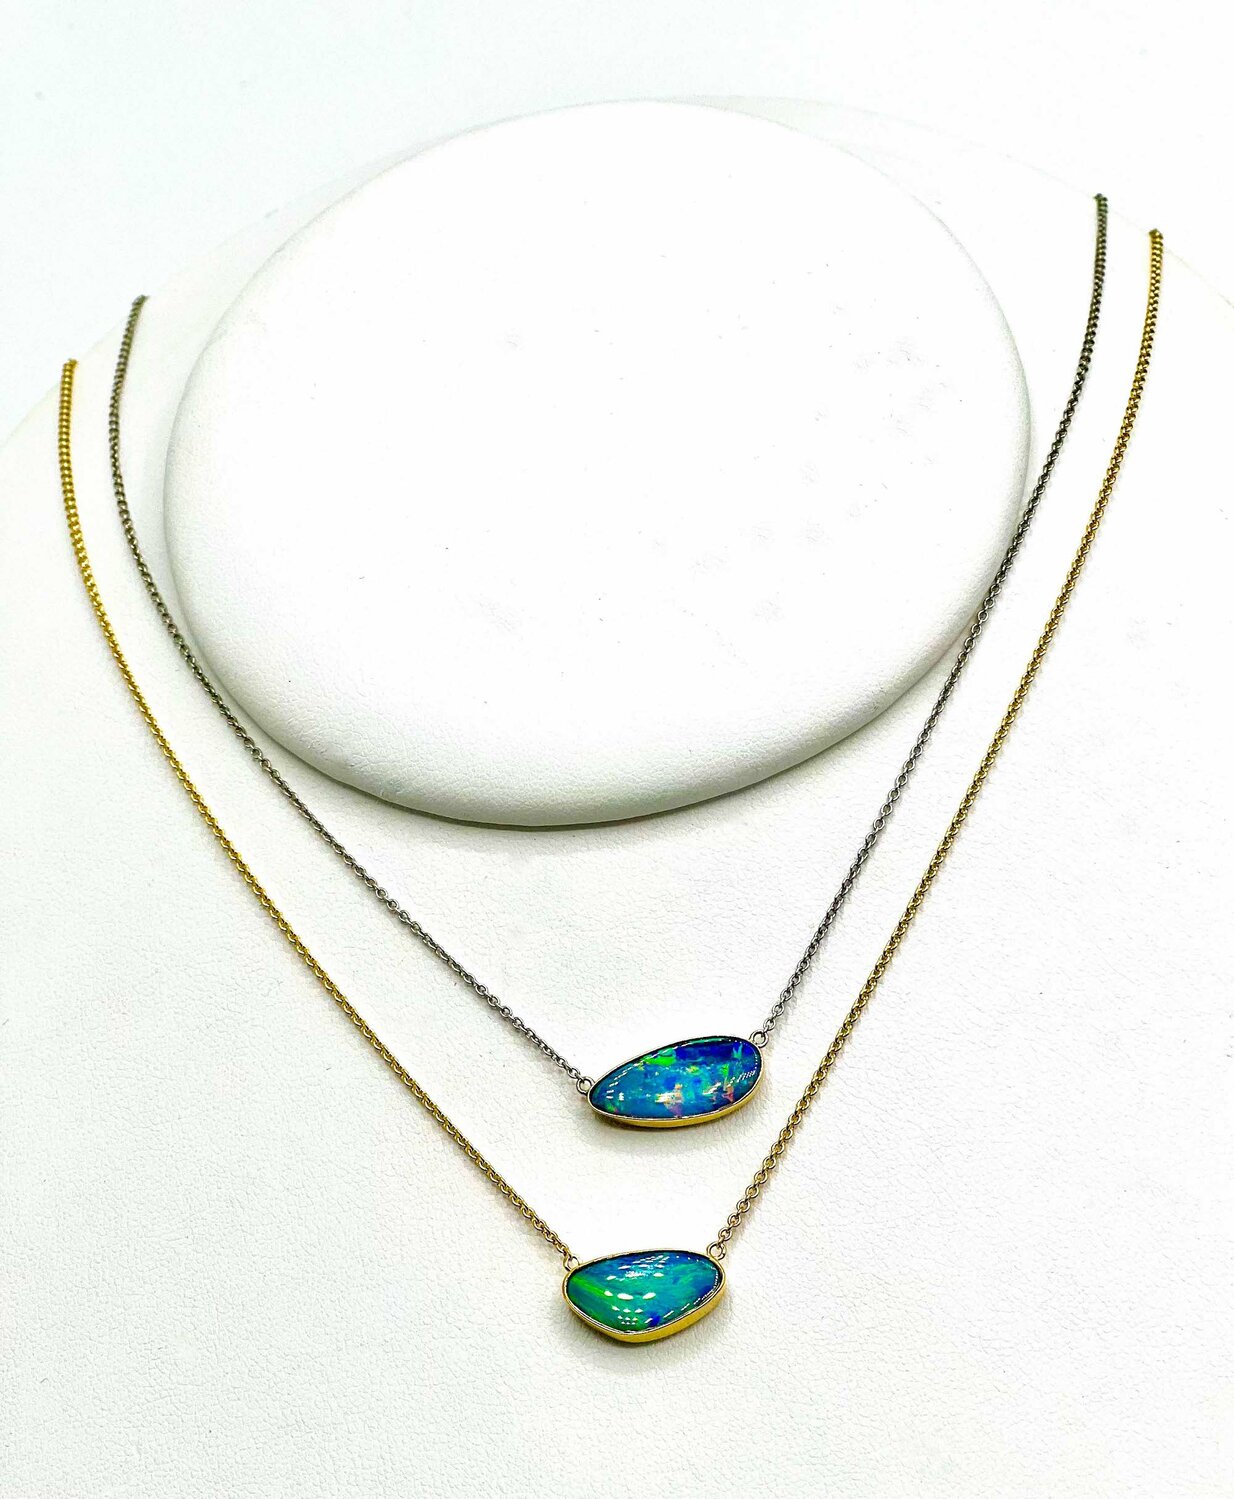 Boulder Opal Necklaces | Lovely delicate Boulder Opal chain necklaces, made by Aimee Bode from her mother Mahri’s vast collection of gemstones.  In white or yellow 14K gold.  $975 and $1,150MAHRI | ManchesterWednesday – Saturday | 10 a.m. to 5 p.m.Sunday | Noon to 5 p.m.Monday | 10 a.m. to 5 p.m.(978) 526-7241